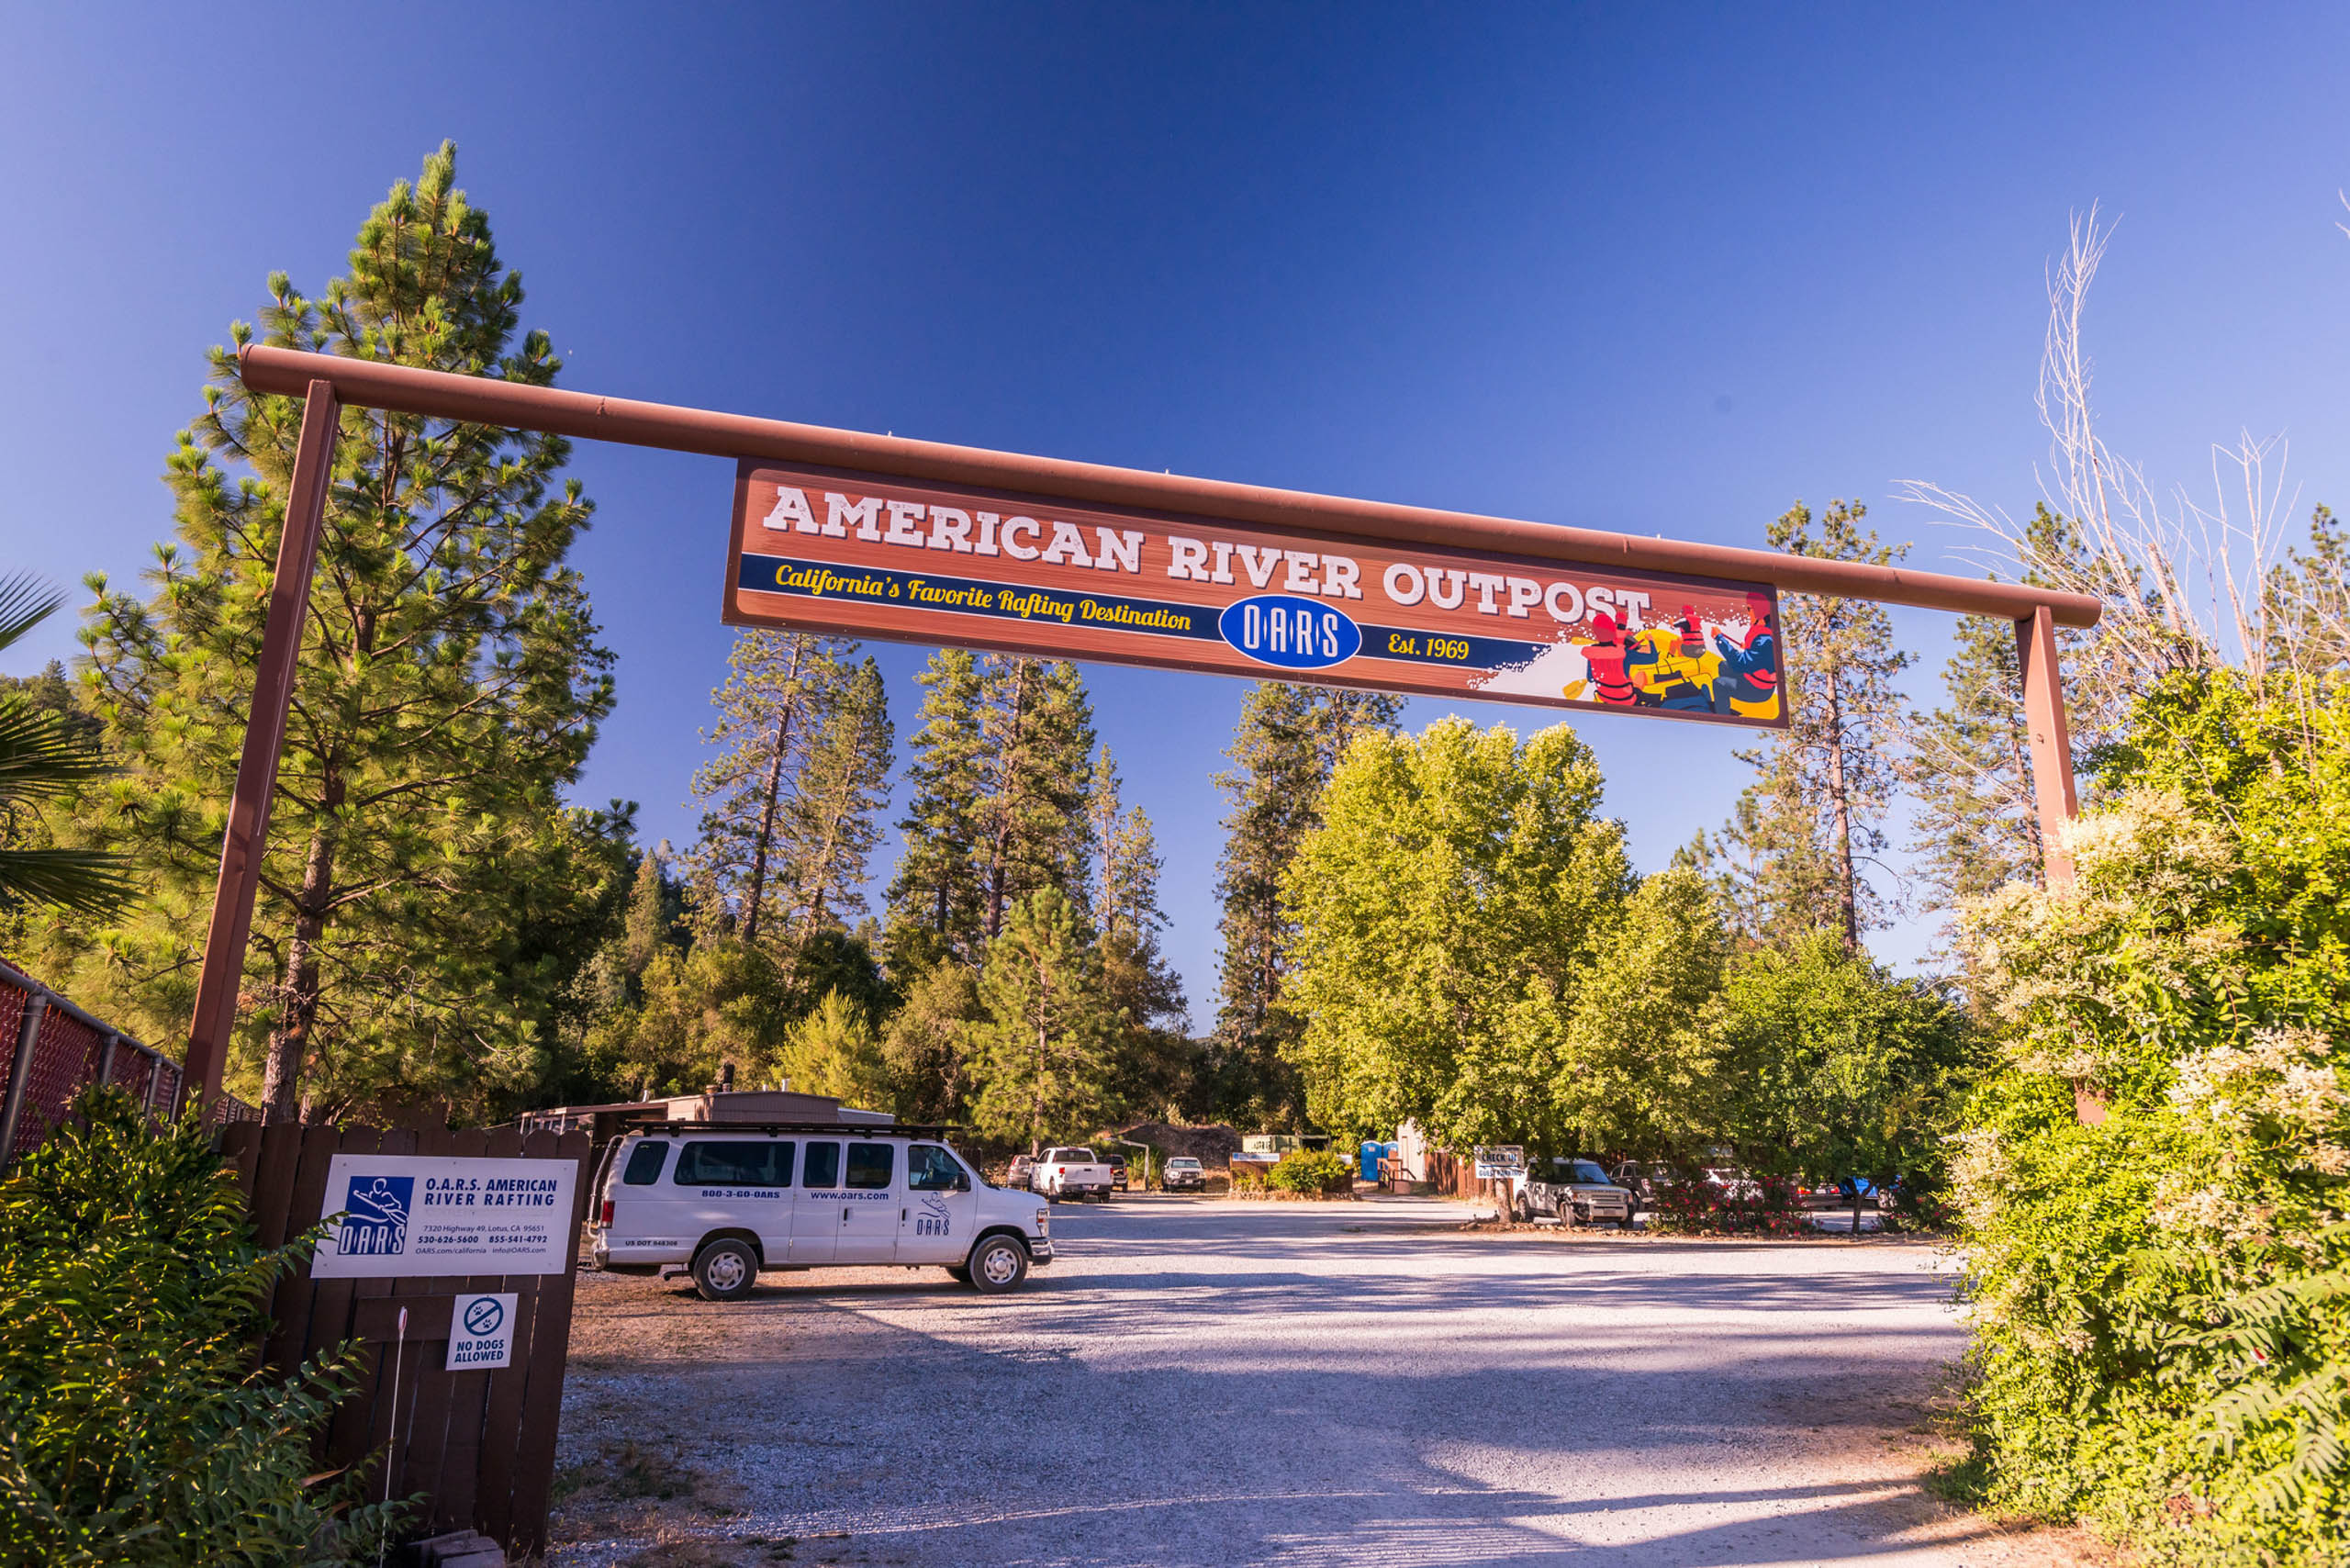 American River Outpost sign.